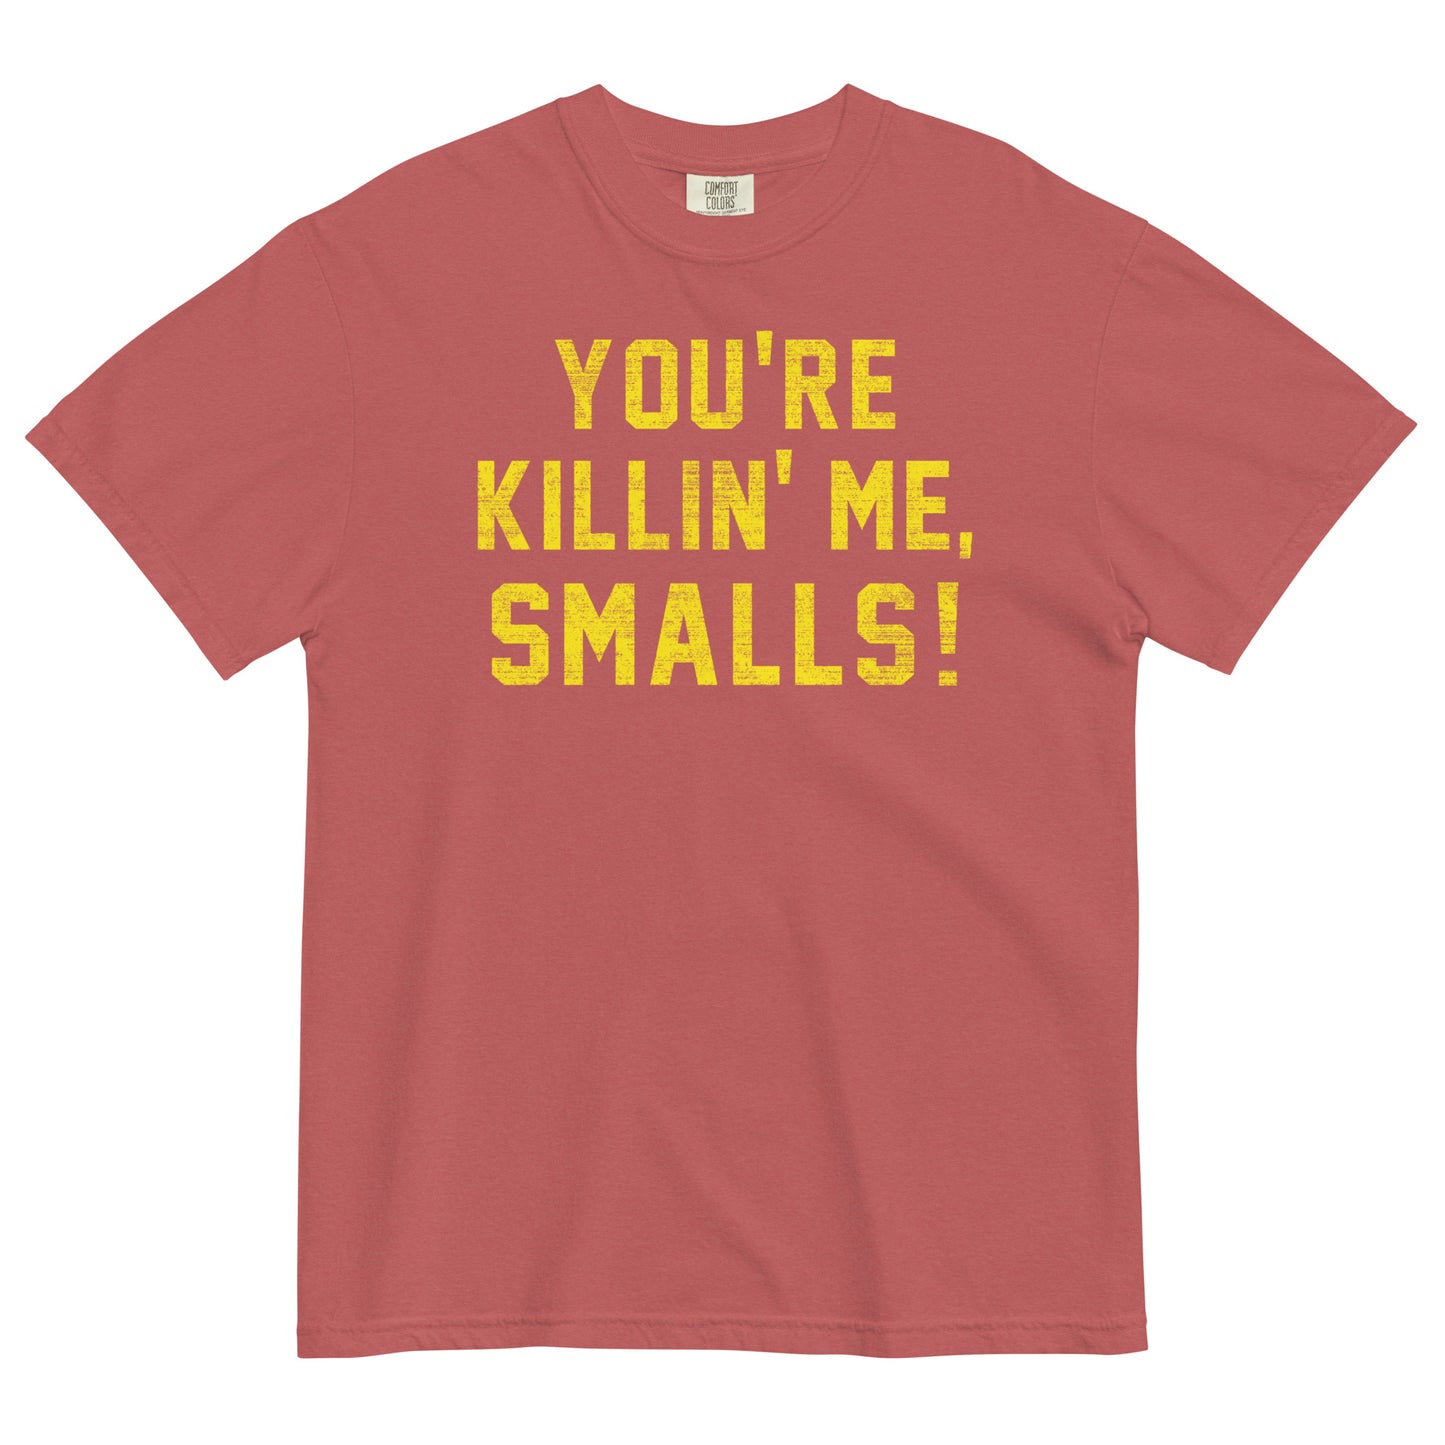 You're Killin' Me Smalls! Men's Relaxed Fit Tee